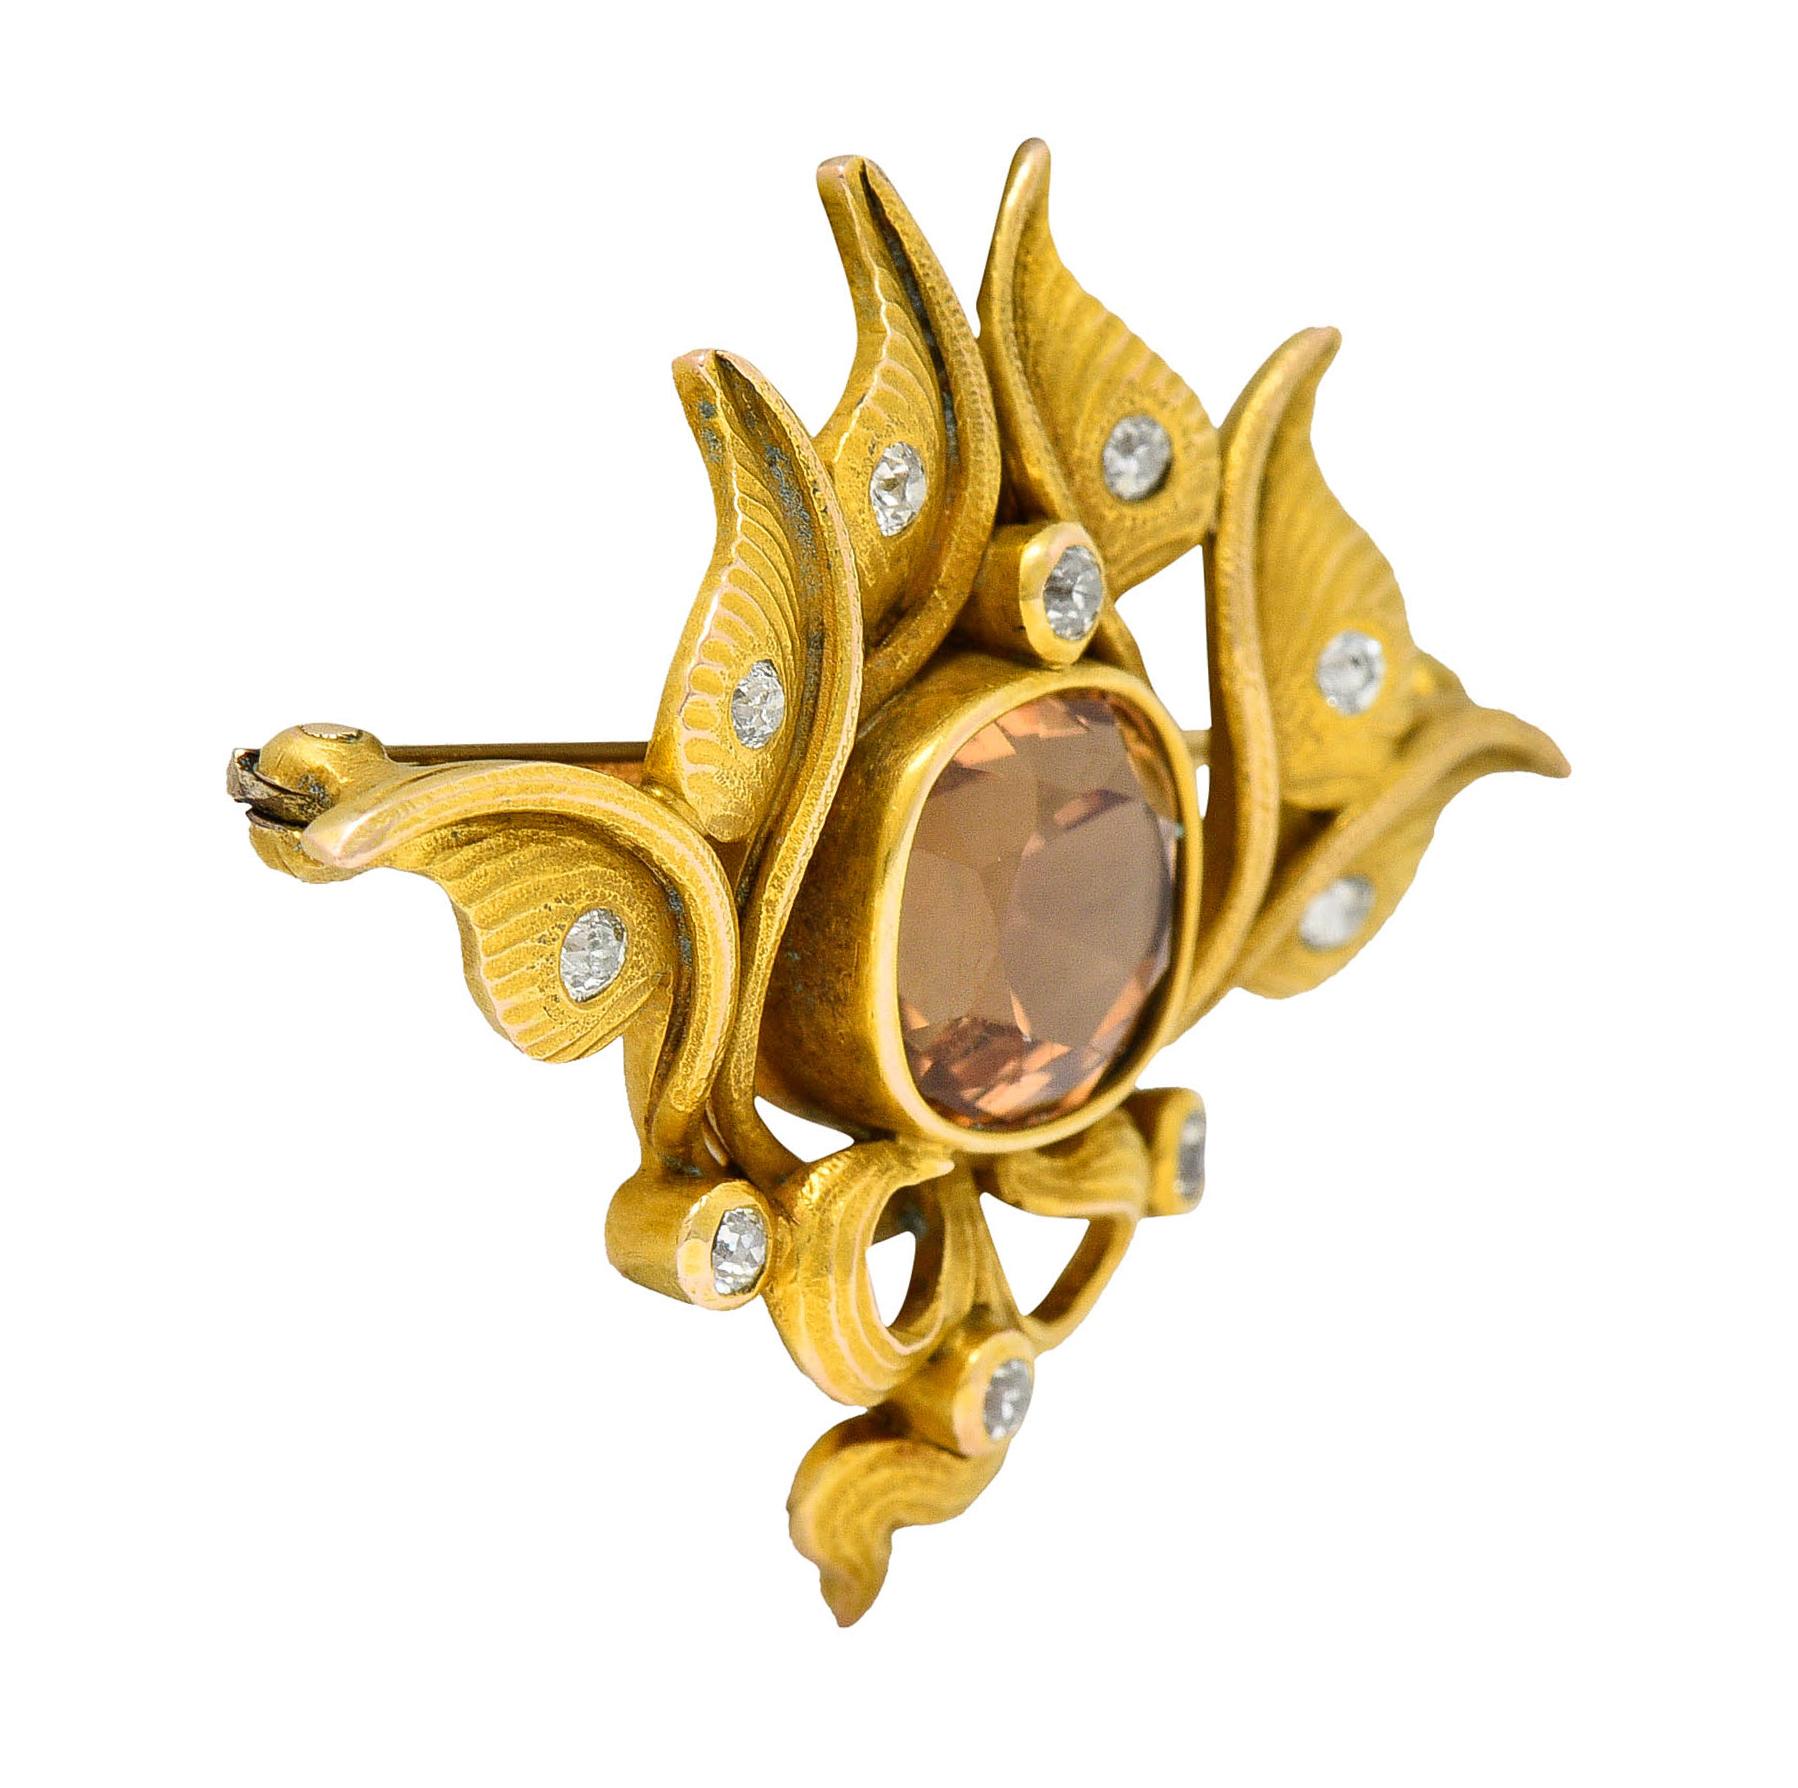 Brooch is designed as meandering whiplashed foliate

Centering a mixed cushion cut imperial topaz weighing approximately 4.75 carats

Transparent with medium light with strong pinkish orange color
 
Surrounded by old European cut diamonds weighing